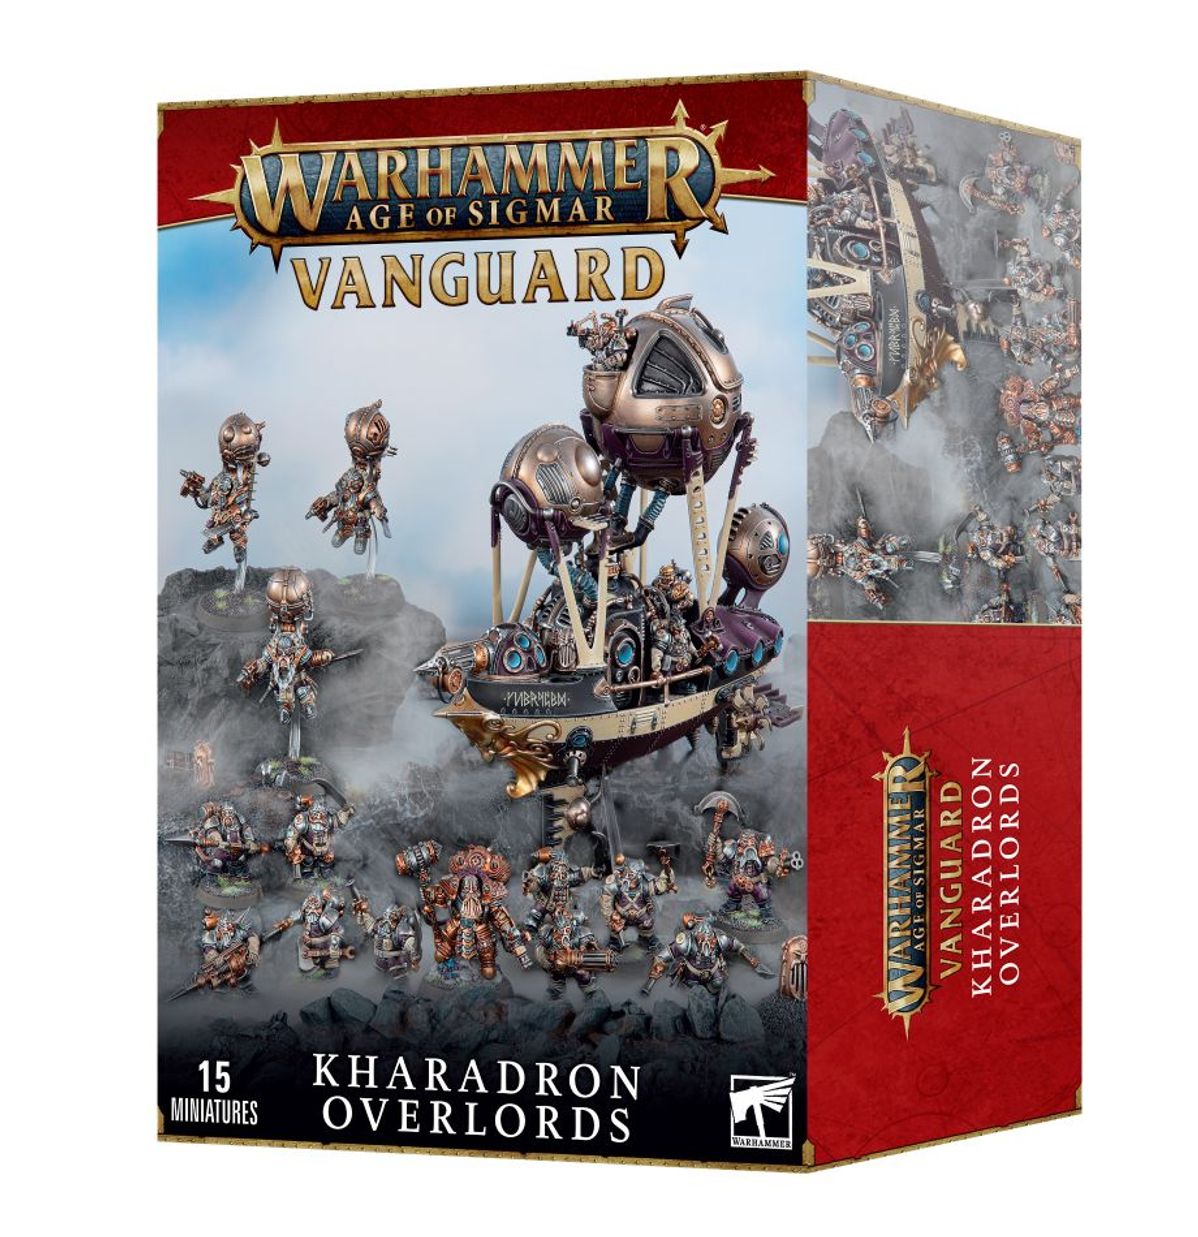 Миниатюры для игры Games Workshop Warhammer Age of Sigmar: Kharadron Overlords 70-15 миниатюры games workshop warhammer age of sigmar fangs of the blood queen 91 43